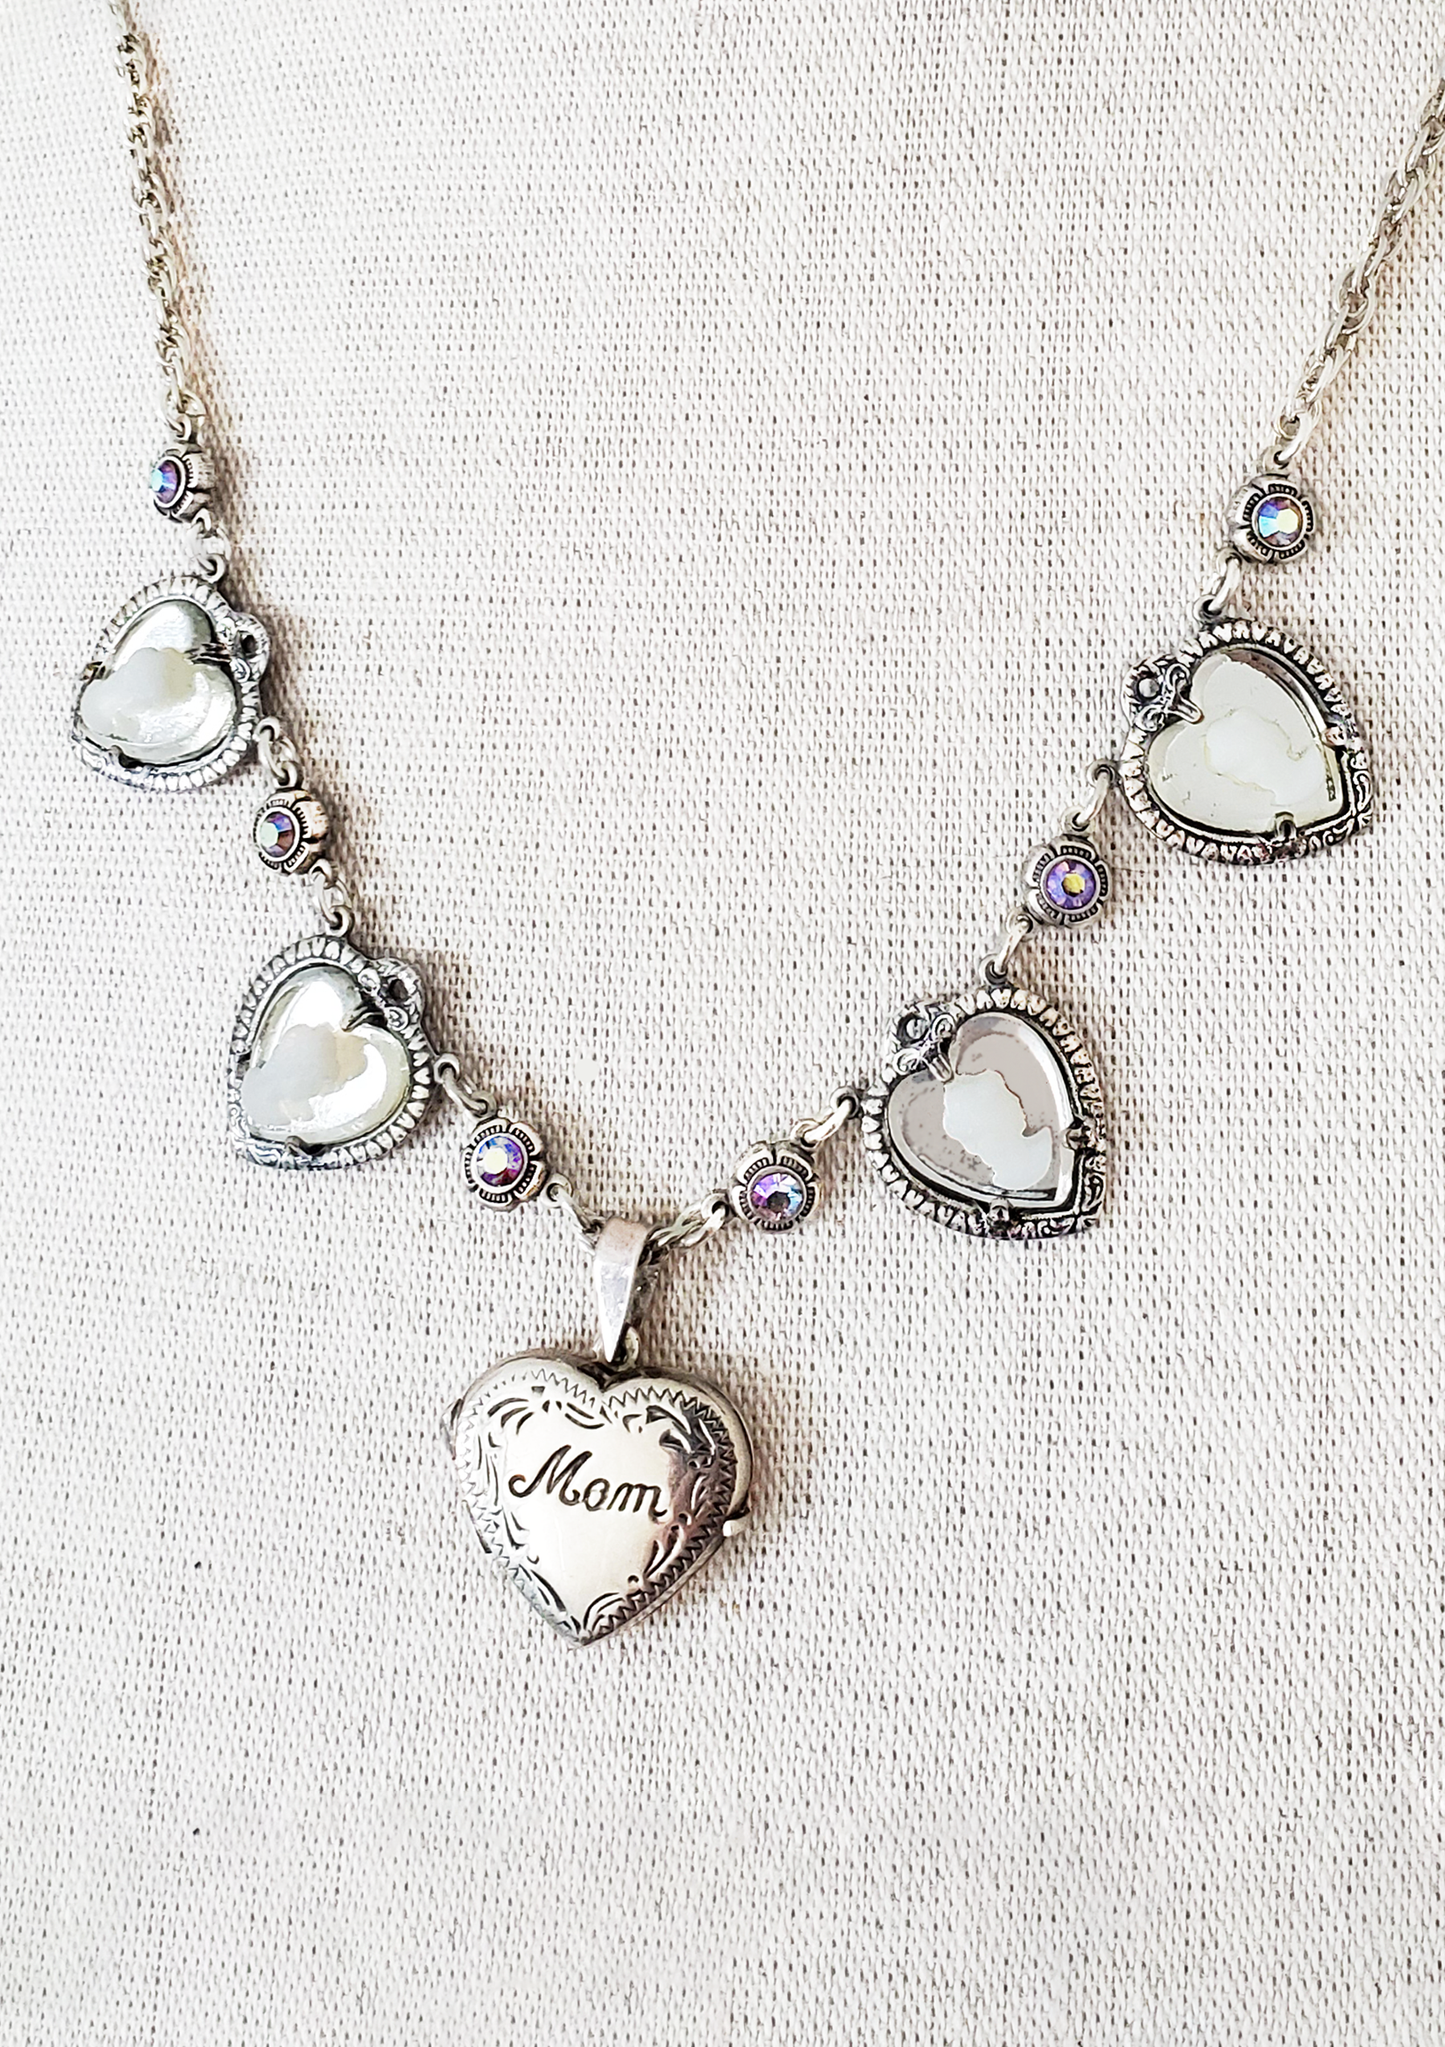 Sterling "Mom" Heart Locket and Heart Cameo Necklace